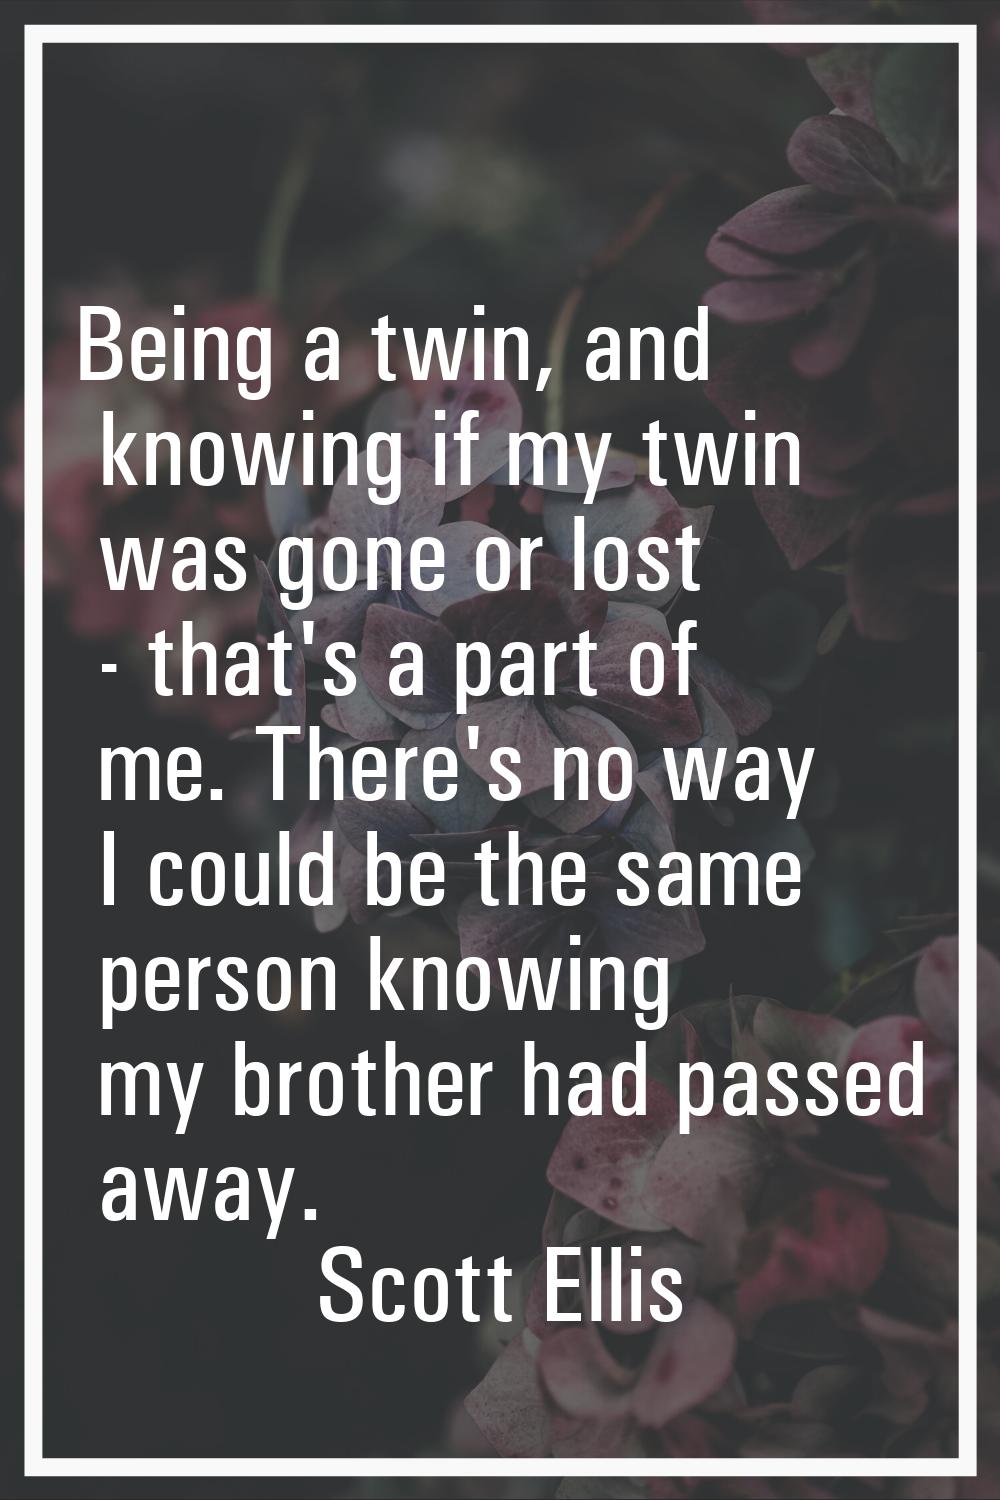 Being a twin, and knowing if my twin was gone or lost - that's a part of me. There's no way I could